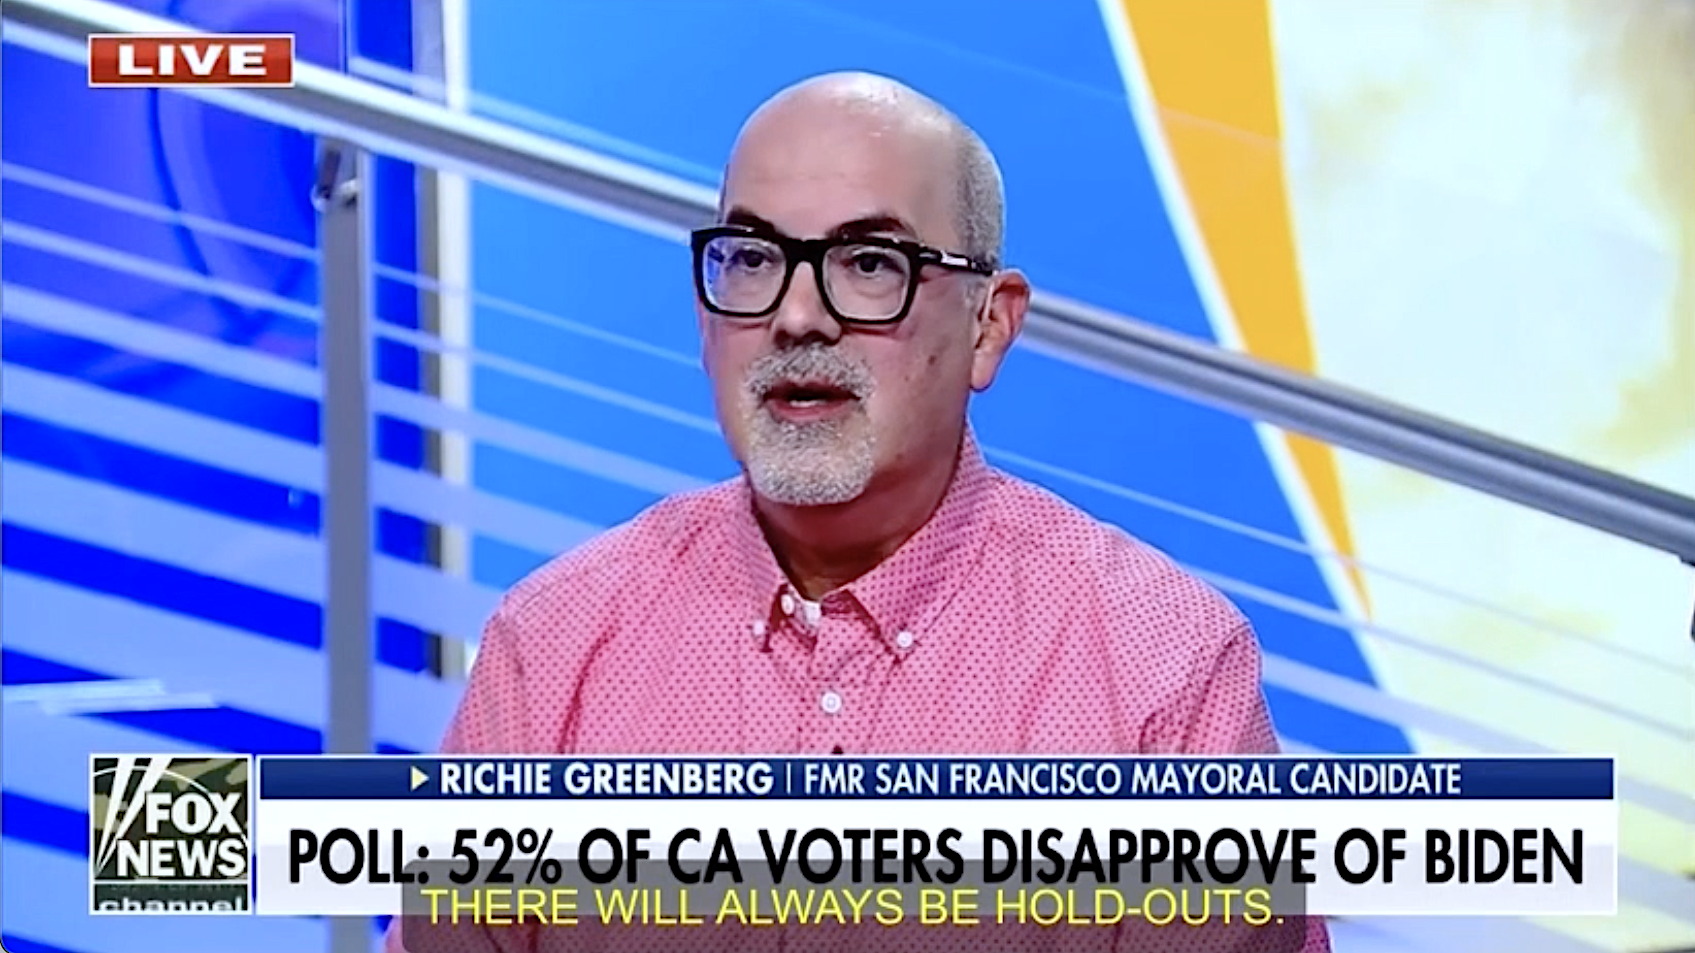 richie greenberg on Fox News describes how CA voters will vote blue